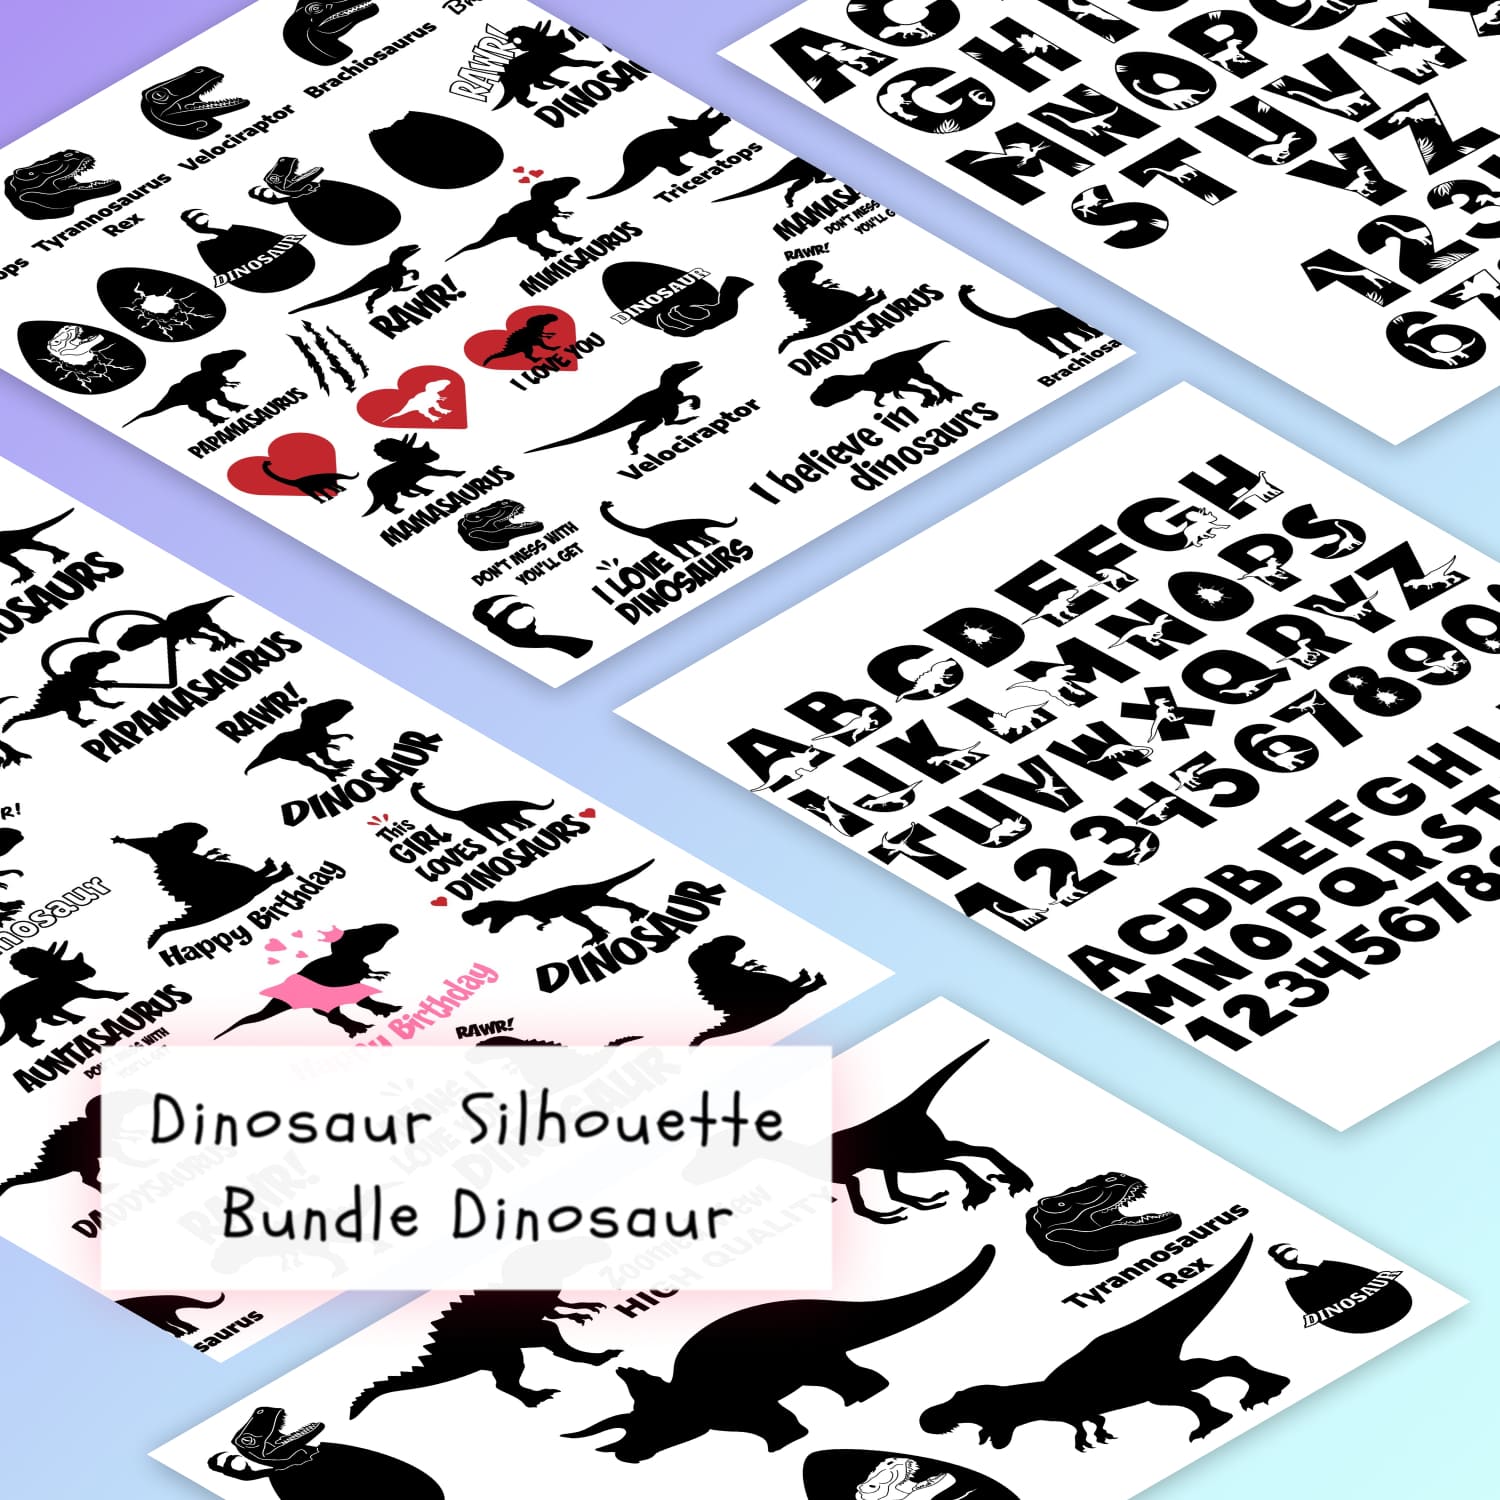 The dinosaur silhouette bundle is shown in black and white.